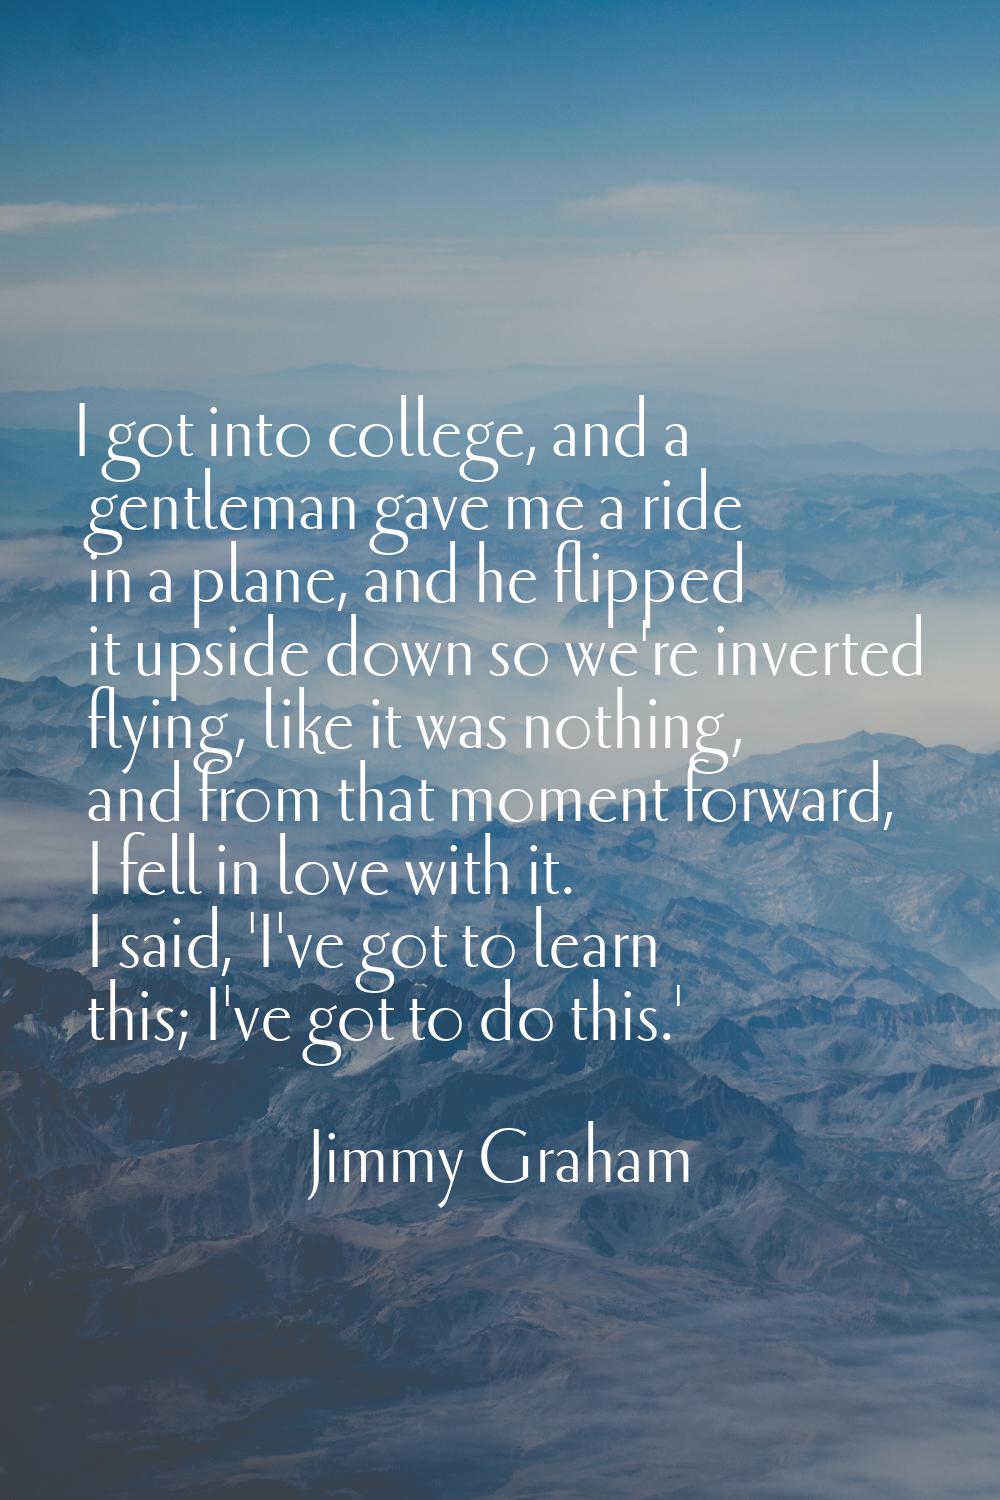 I got into college, and a gentleman gave me a ride in a plane, and he flipped it upside down so we'